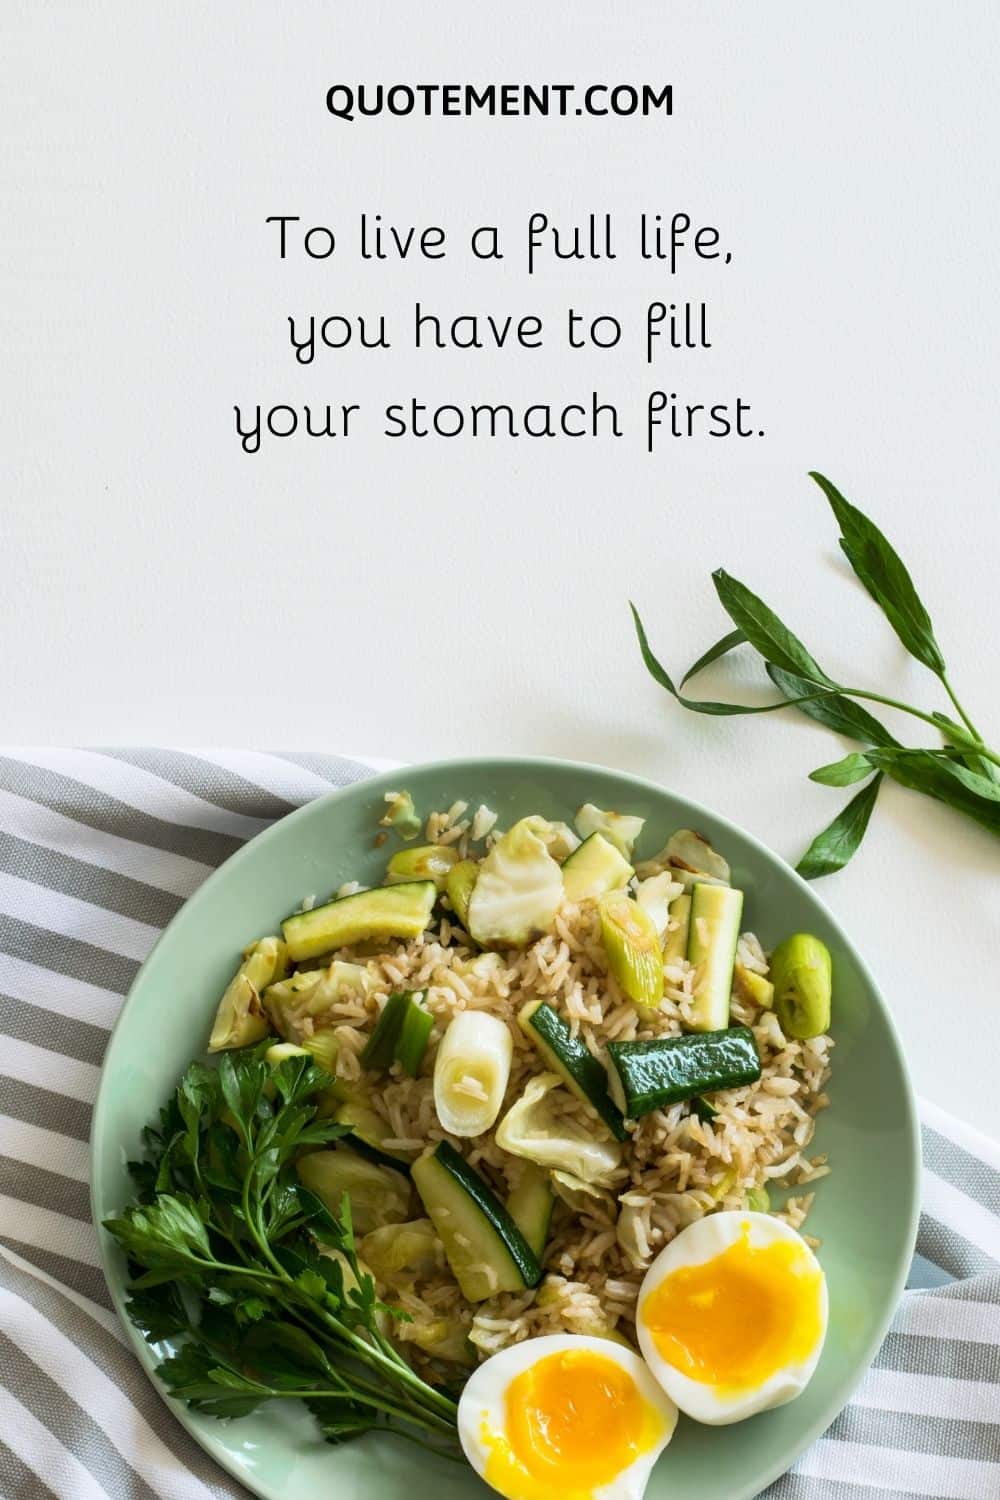 To live a full life, you have to fill your stomach first